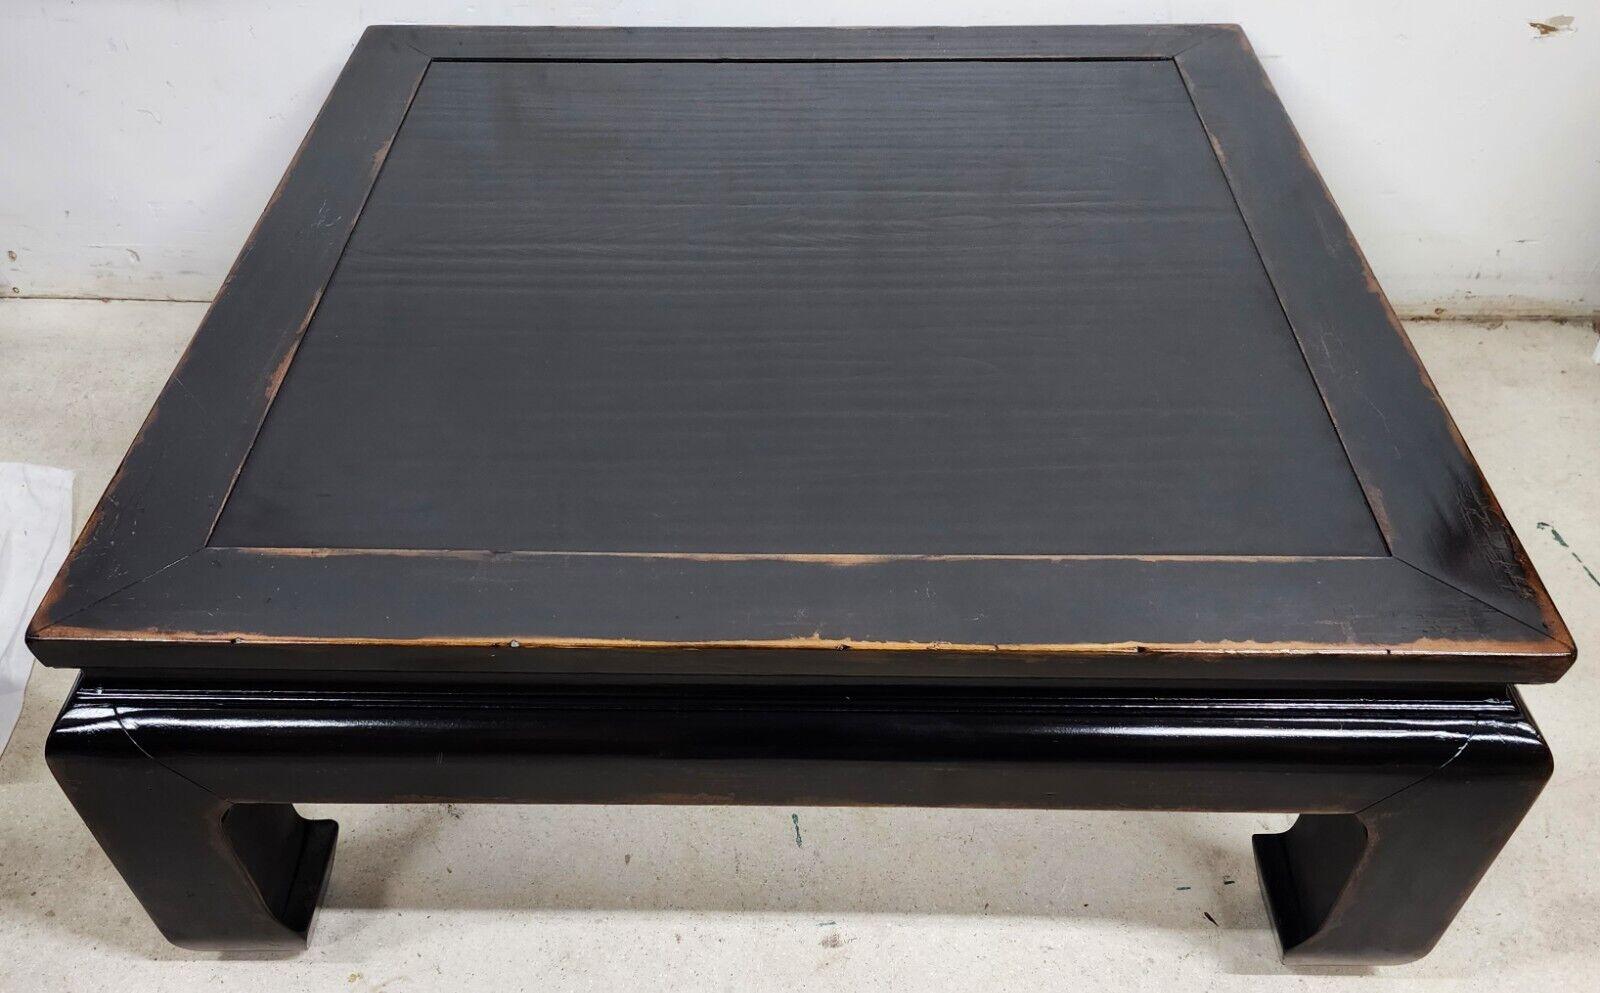 For FULL item description click on CONTINUE READING at the bottom of this page.

Offering One Of Our Recent Palm Beach Estate Fine Furniture Acquisitions Of A
Ming Asian Opium Style Distressed Coffee Table
It was made intentionally to look